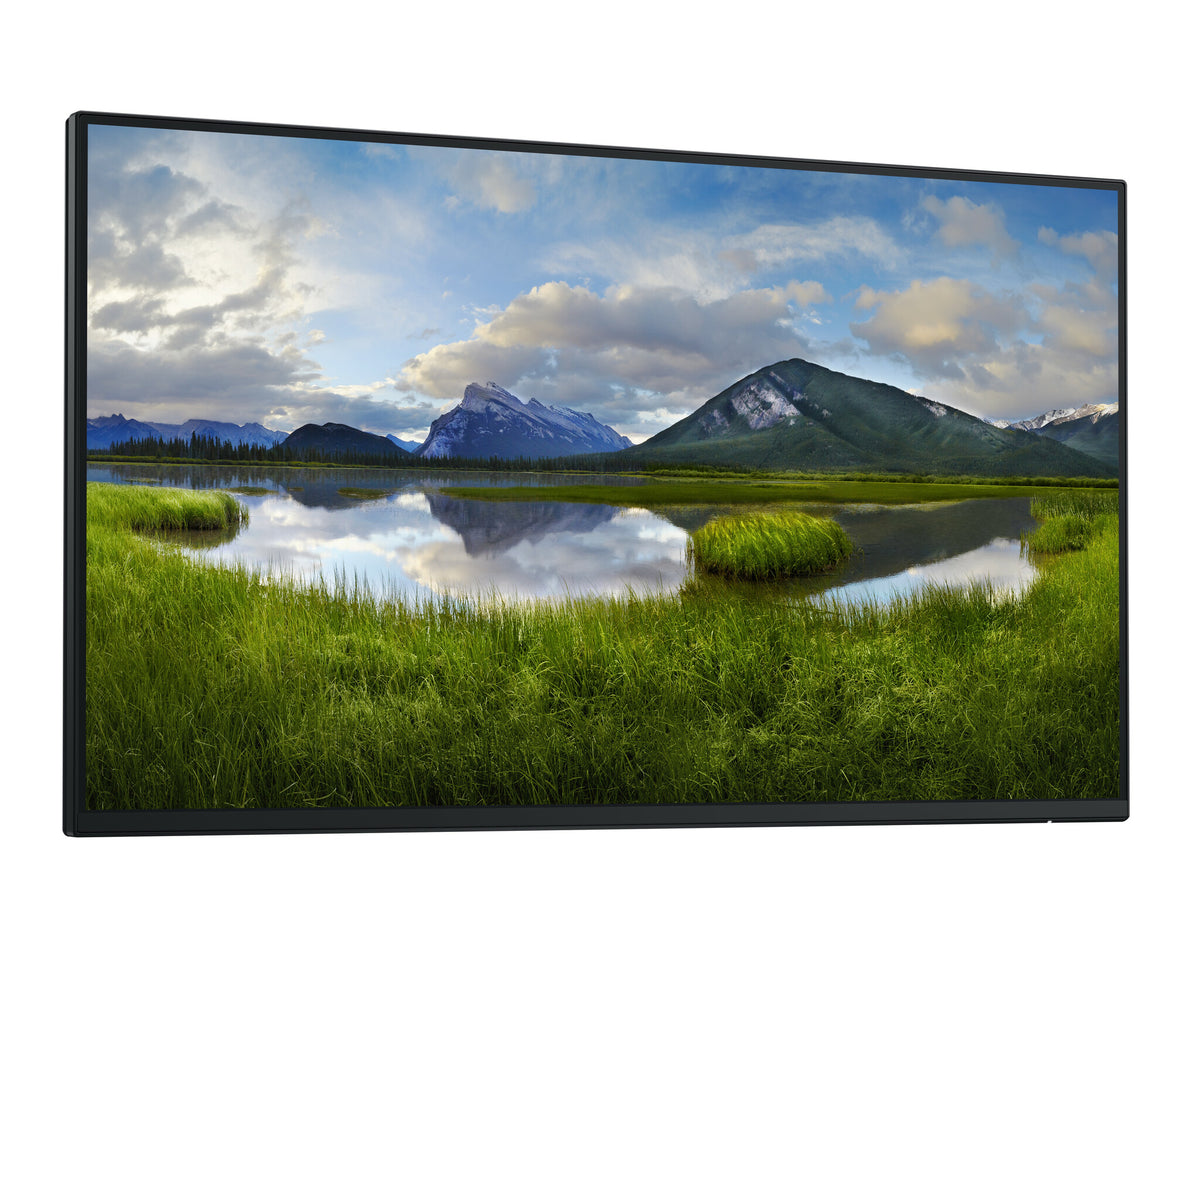 DELL P Series P2425HE_WOST - 61 cm (24&quot;) - 1920 x 1080 pixels Full HD LCD Monitor